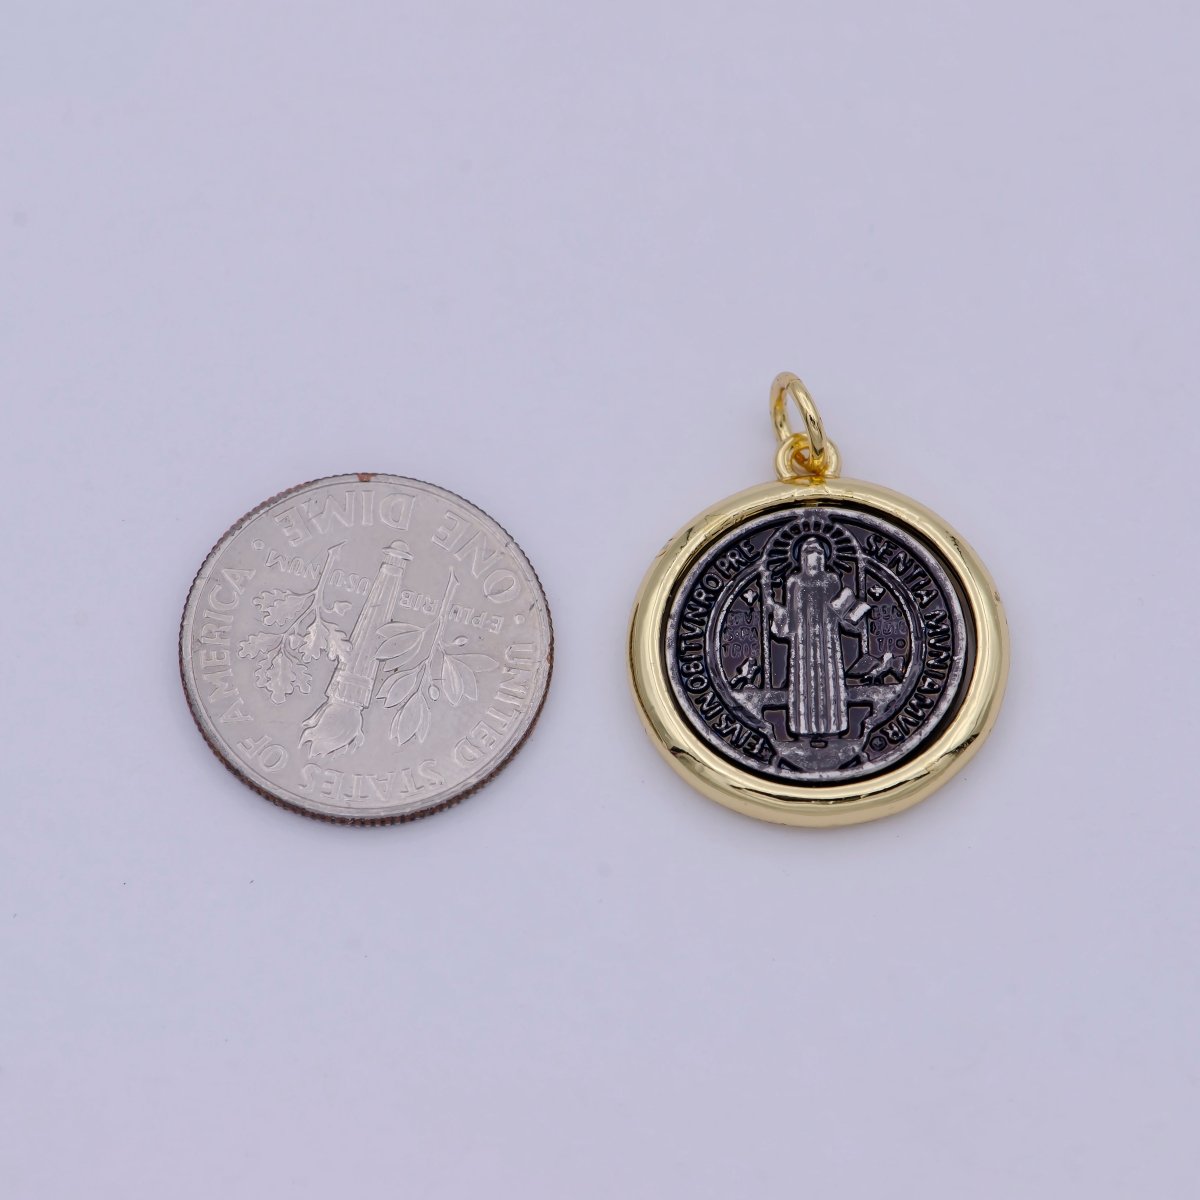 Dainty 24k Gold Filled Coin Saint Benedict Charm Religious Medallion Bracelet Necklace Pendant Earring Findings for Jewelry Making E-123 - DLUXCA